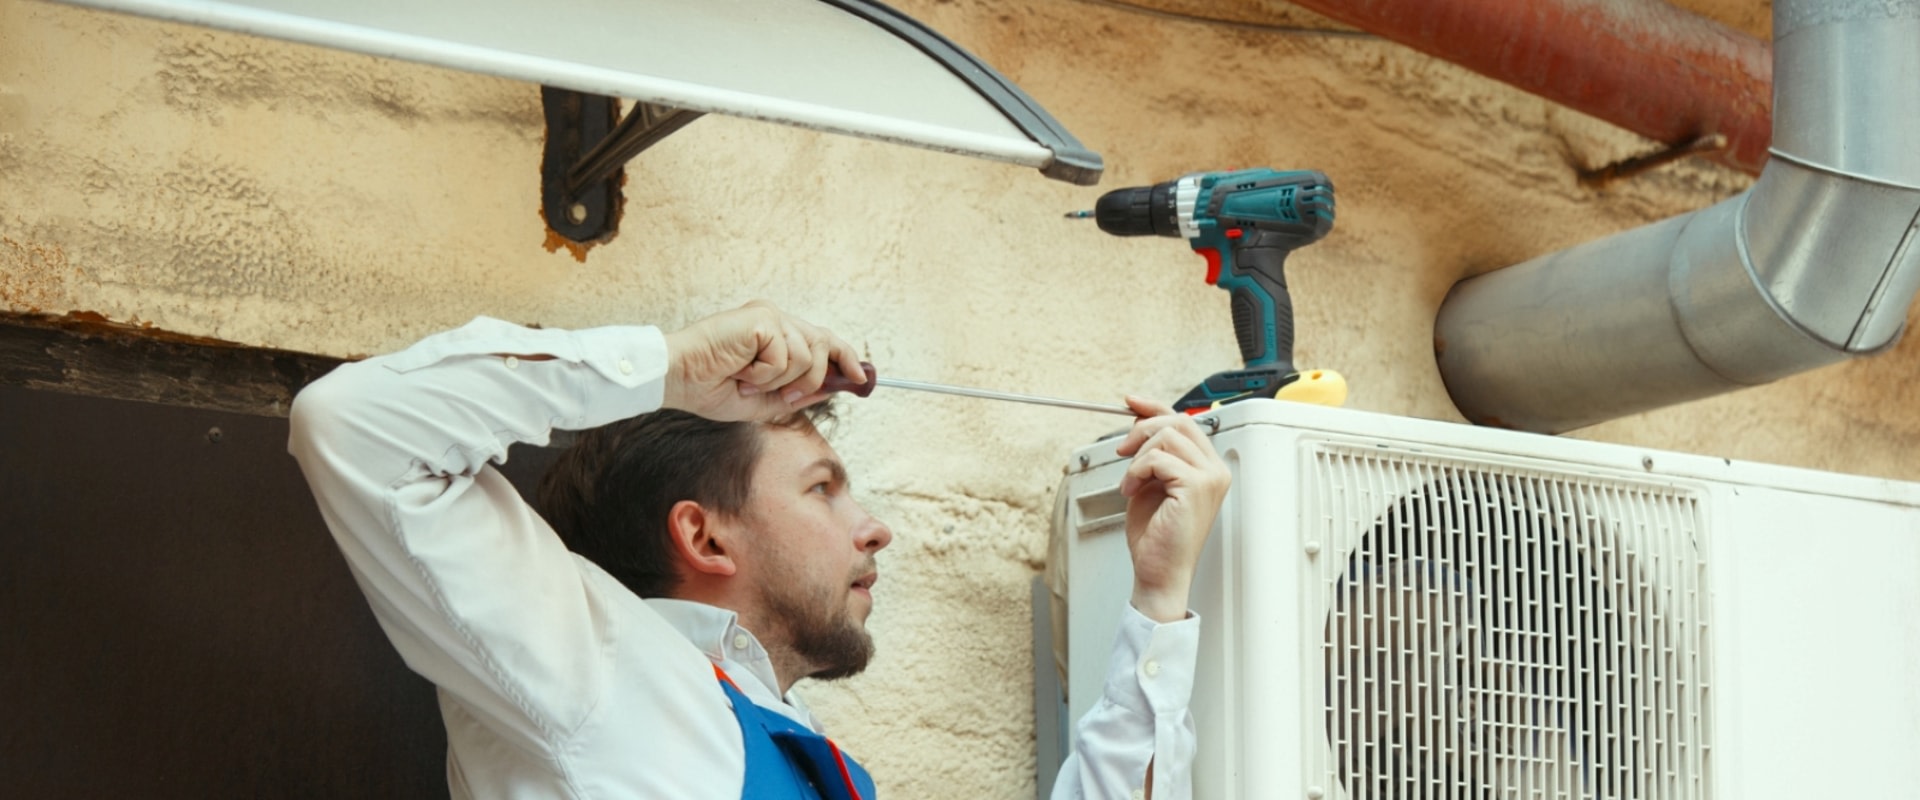 Transform Your Home's Climate With Furnace Repair And AC Services In Birmingham, Alabama